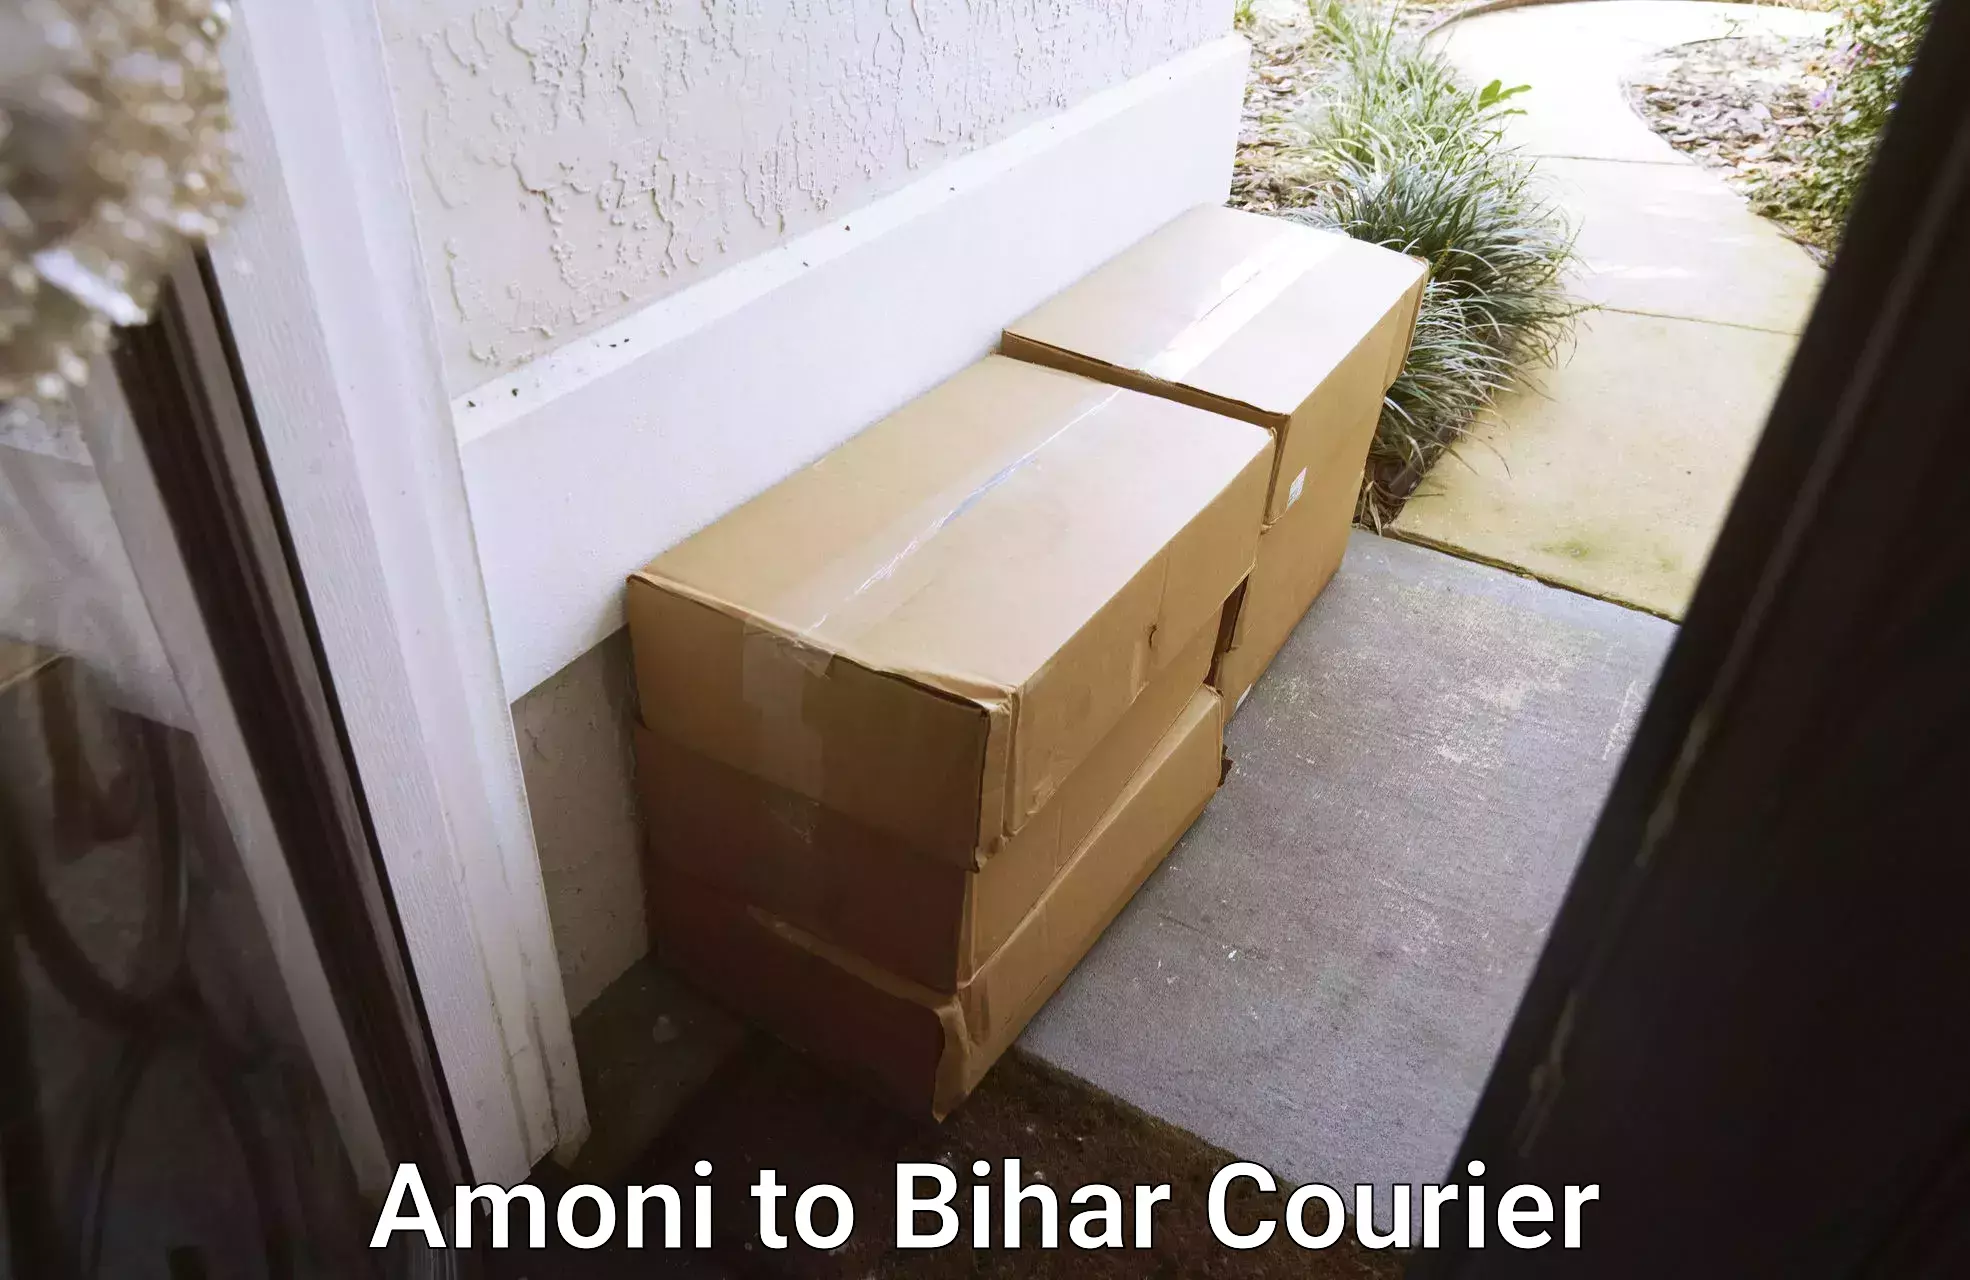 On-call courier service in Amoni to Hazrat Jandaha